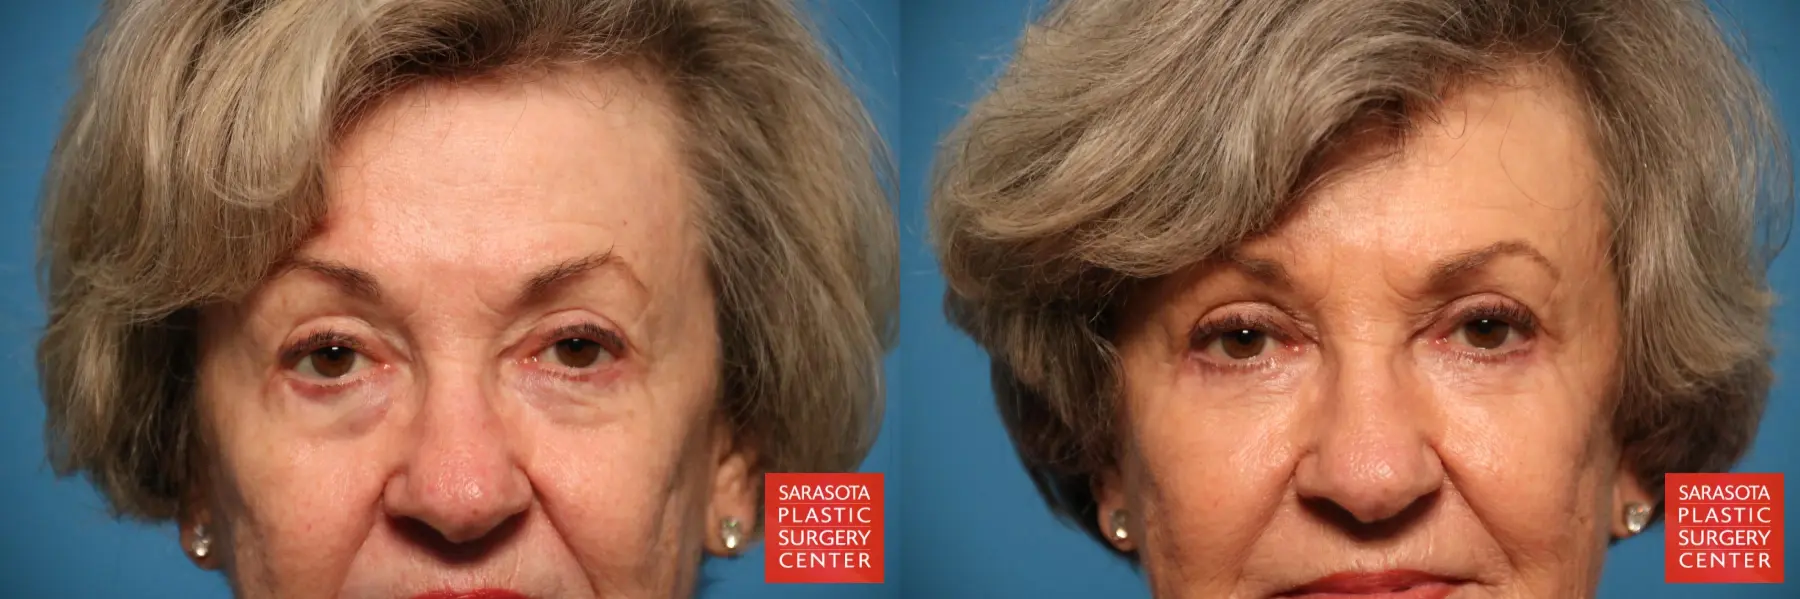 Eyelid Lift: Patient 14 - Before and After 1